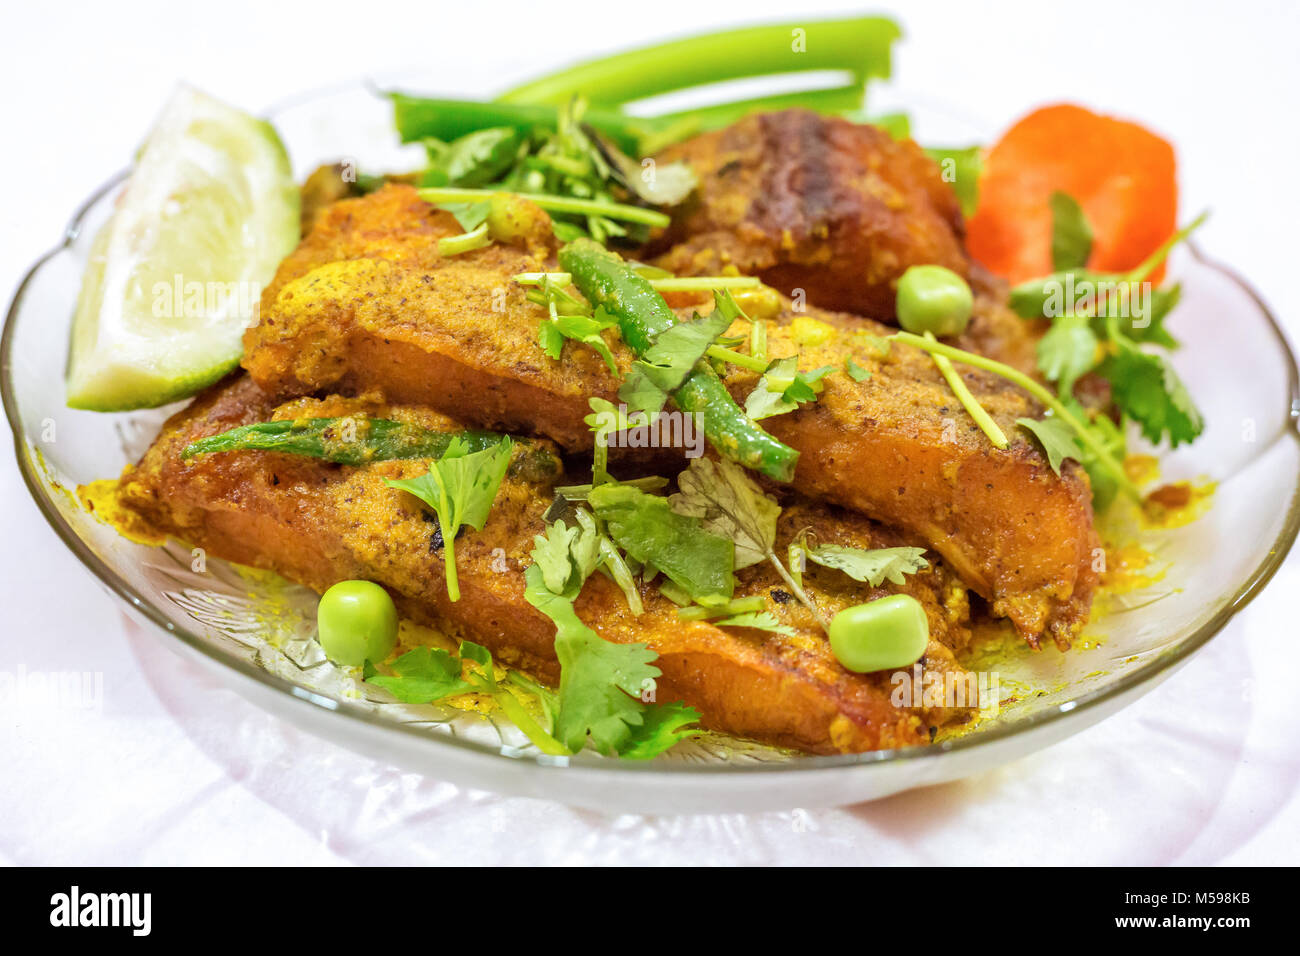 Spicy rohu fish masala curry garnished with coriander, beans, carrot, green chili and lemon slice. Rohu fish is a popular non vegetarian diet in India. Stock Photo